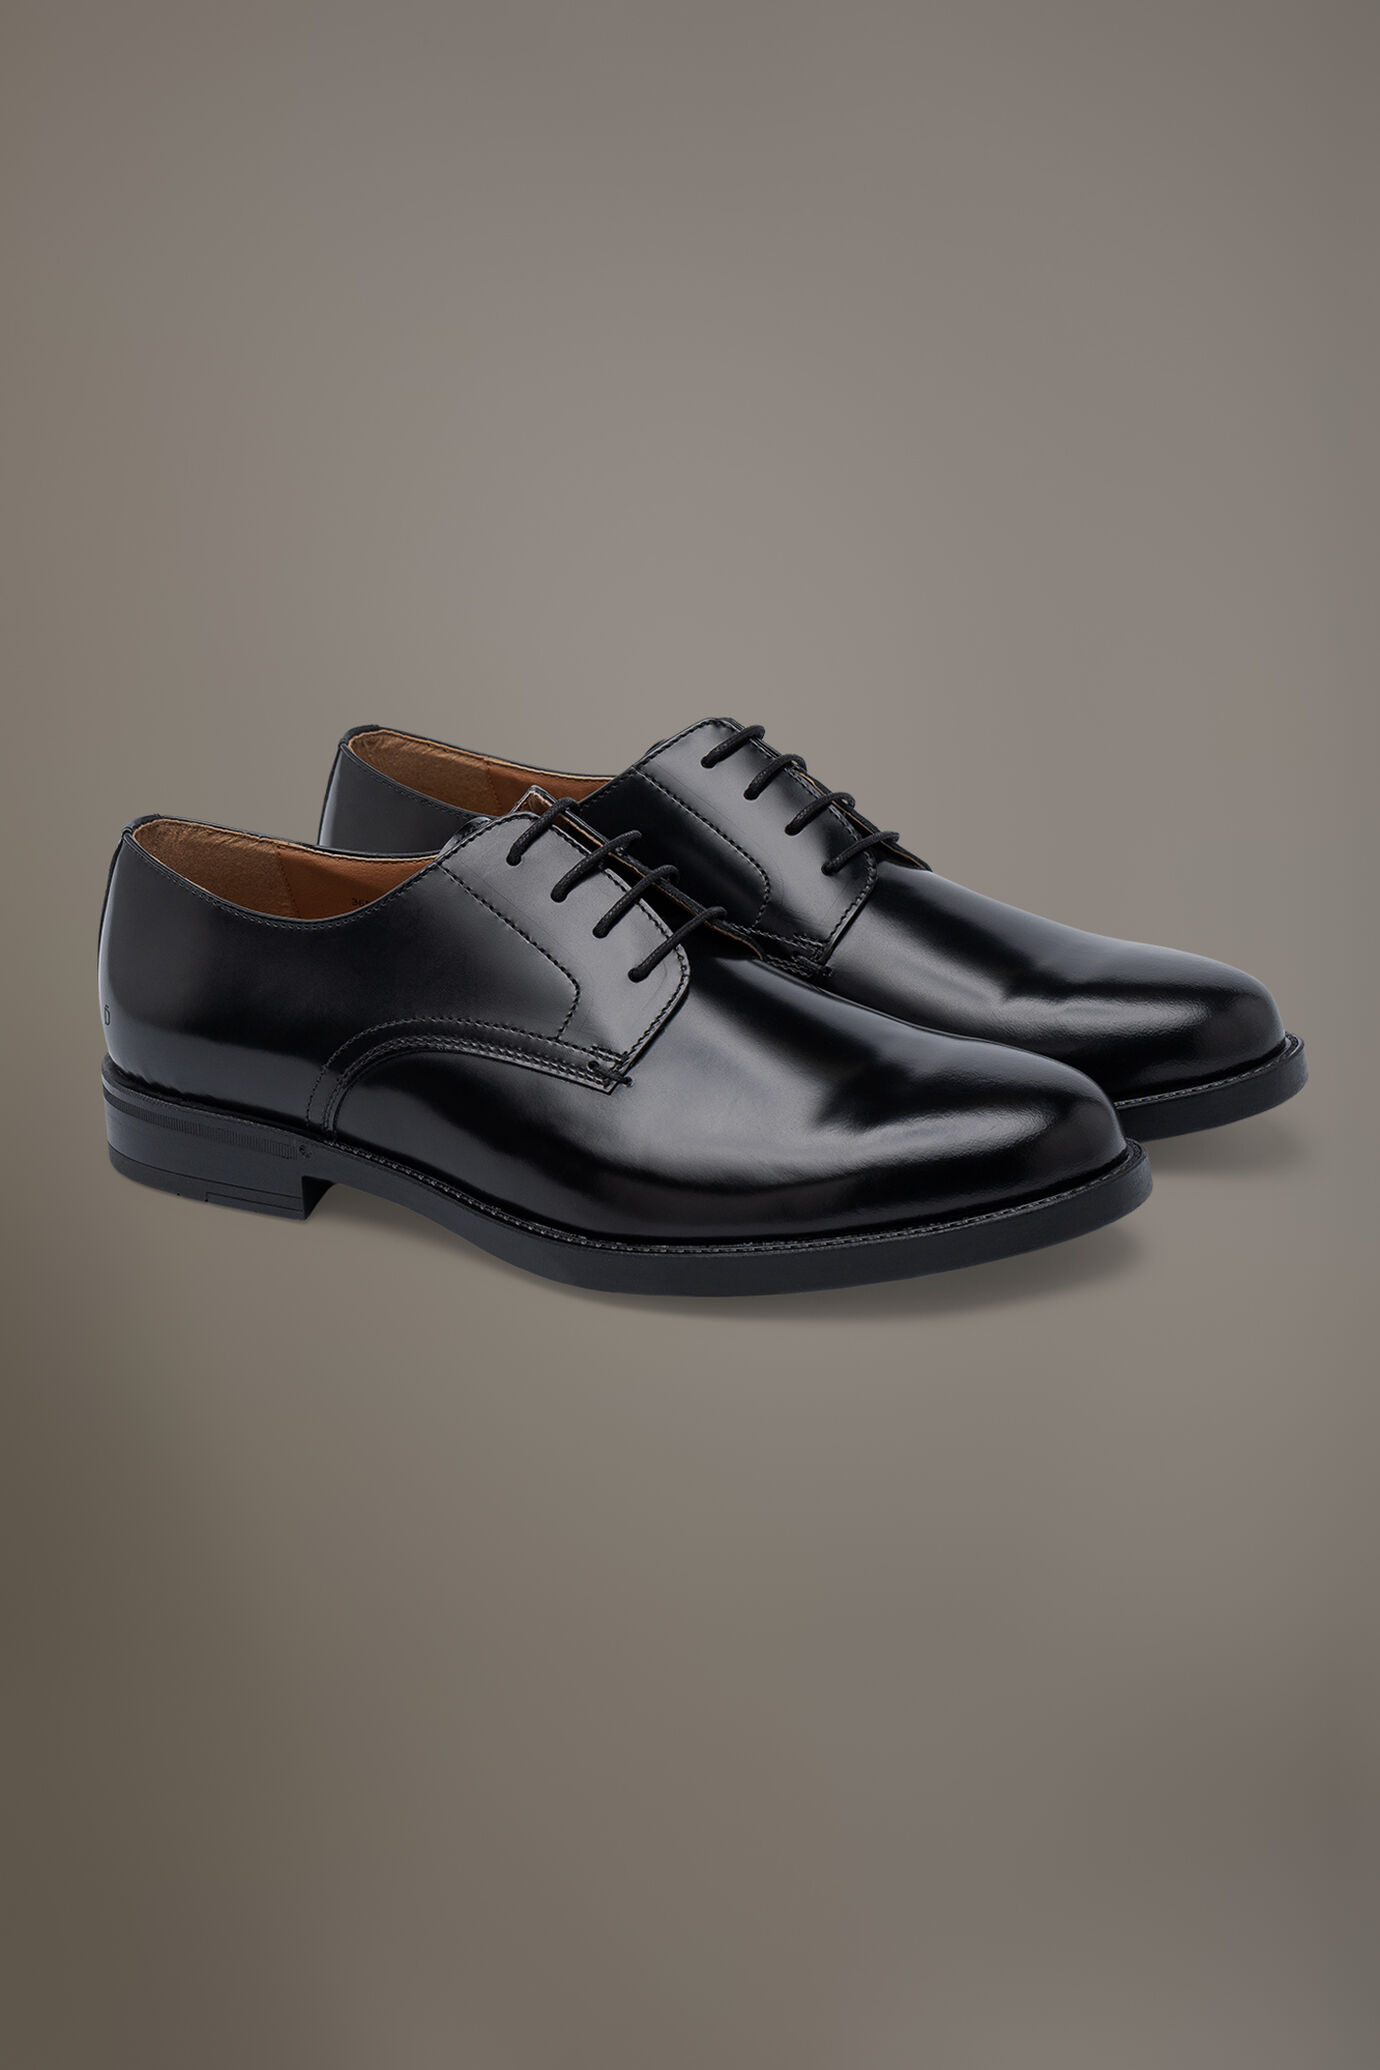 Derby shoes 100% brushed leather with rubber sole